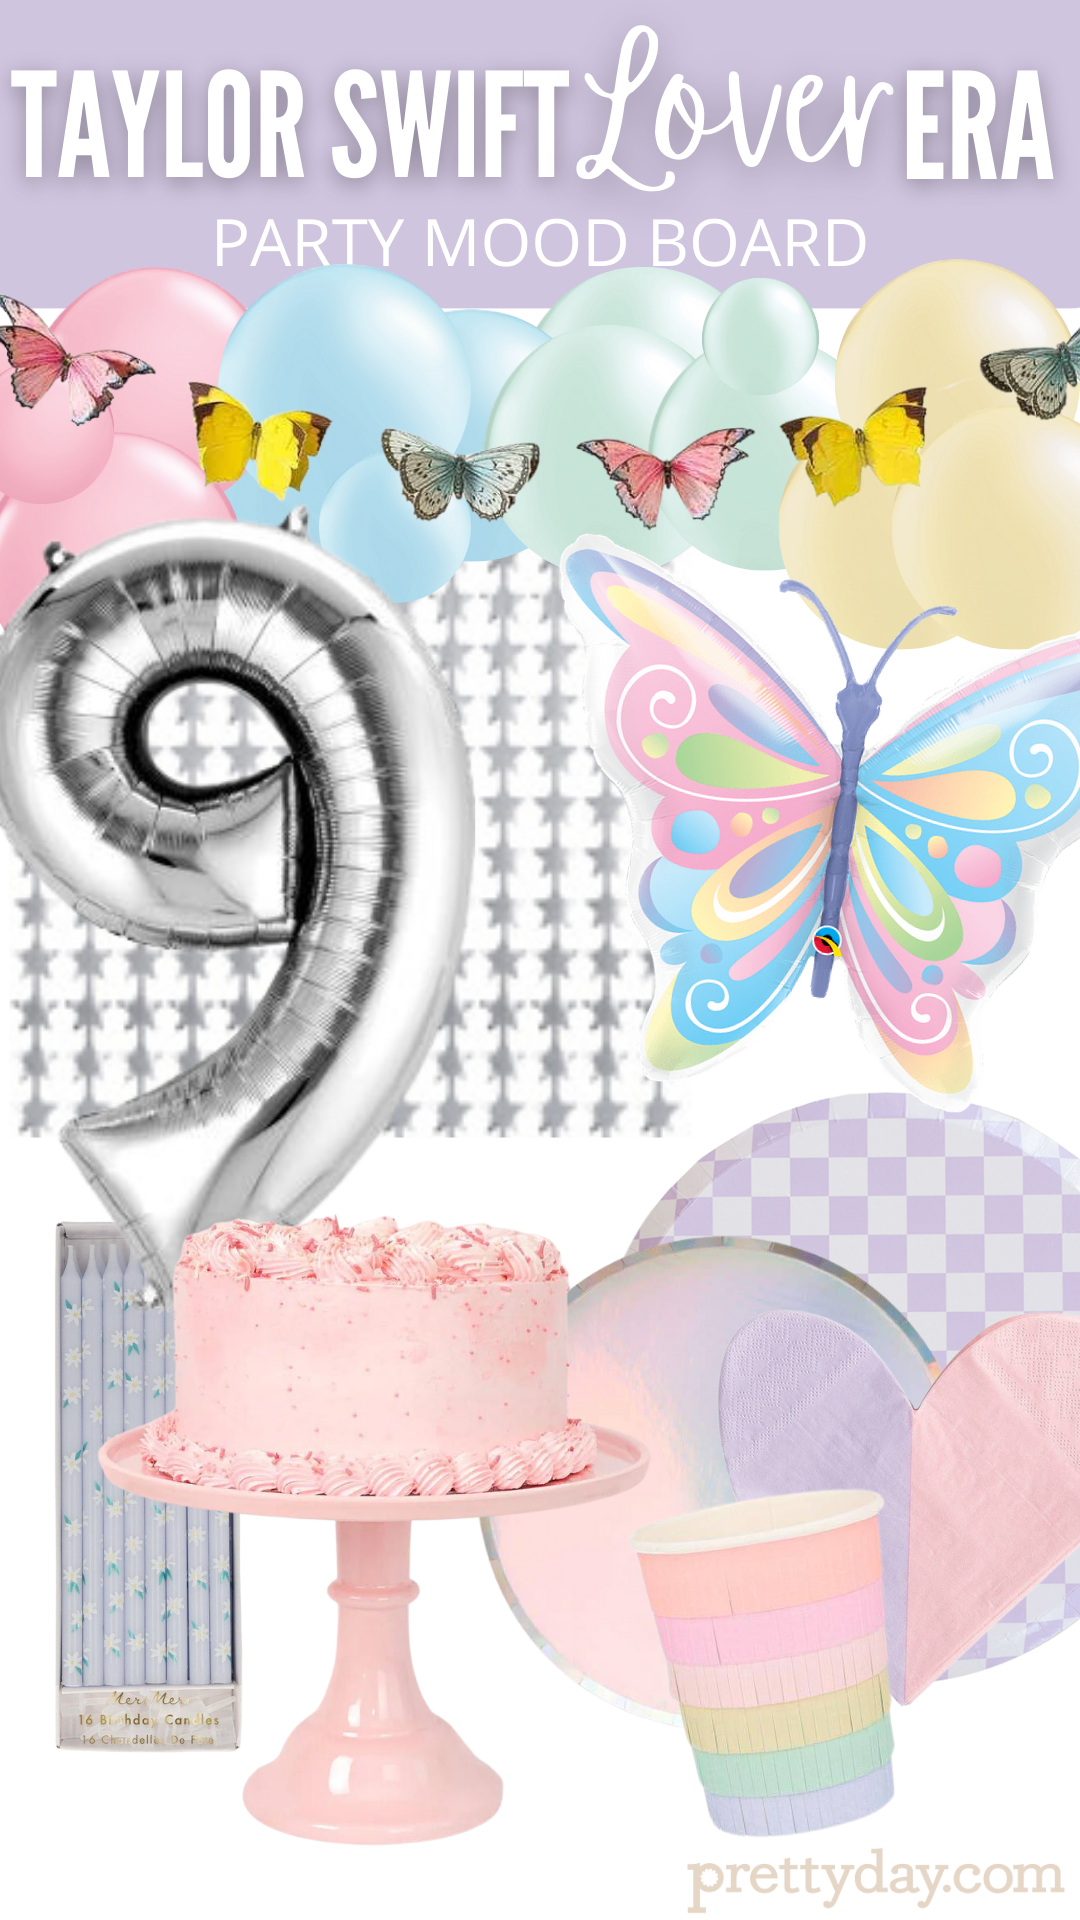  Taylor Singer Birthday Party Decorations, Swift Music Birthday  Decorations Popular Singer Party Supplies : Toys & Games